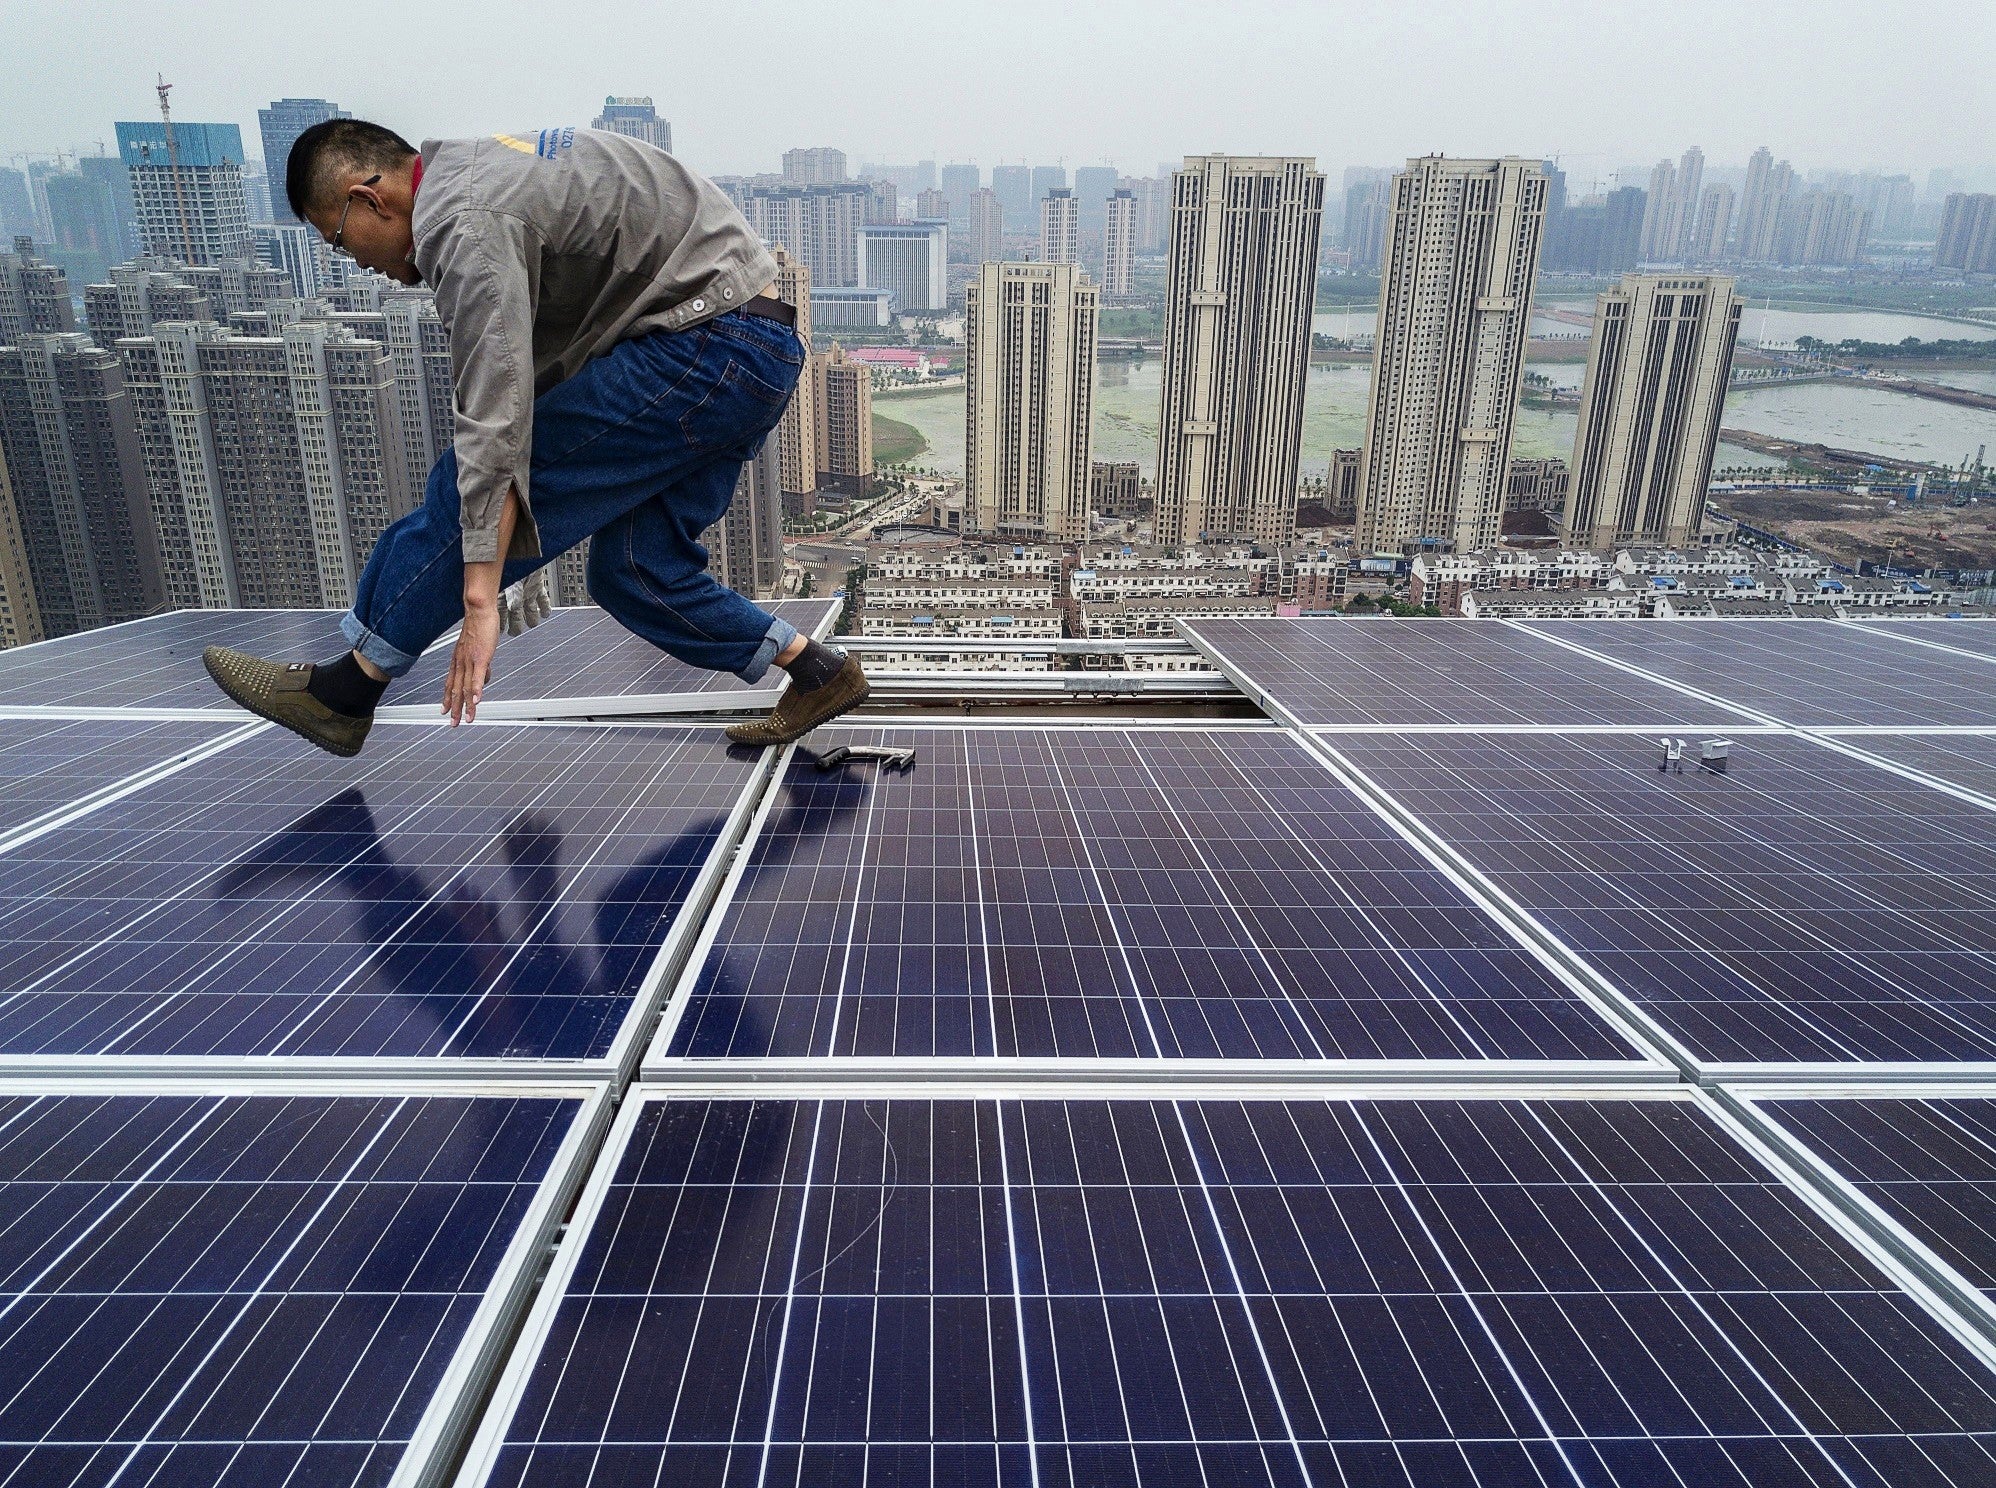 Solar panels on rooftops in China have potential to match current